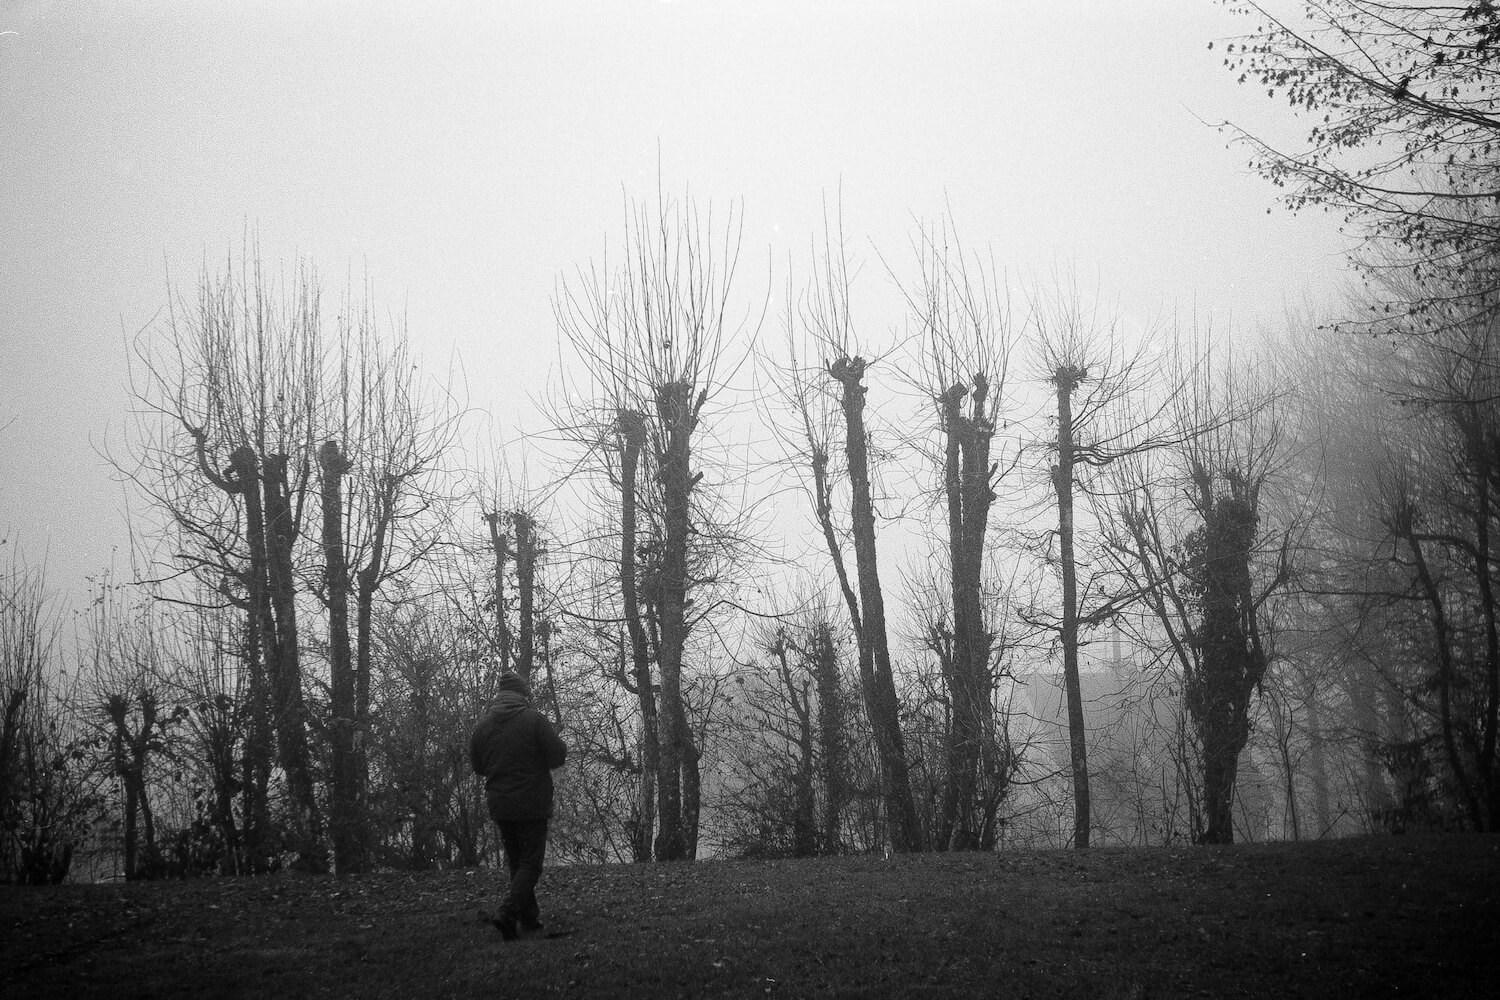 5 Frames... In the fog with an Agfa Optima I and NoColorStudio No. 10 film (35mm Format / EI 100 / Agfa Color-Agnar f/2.8/45mm) - by Olaf